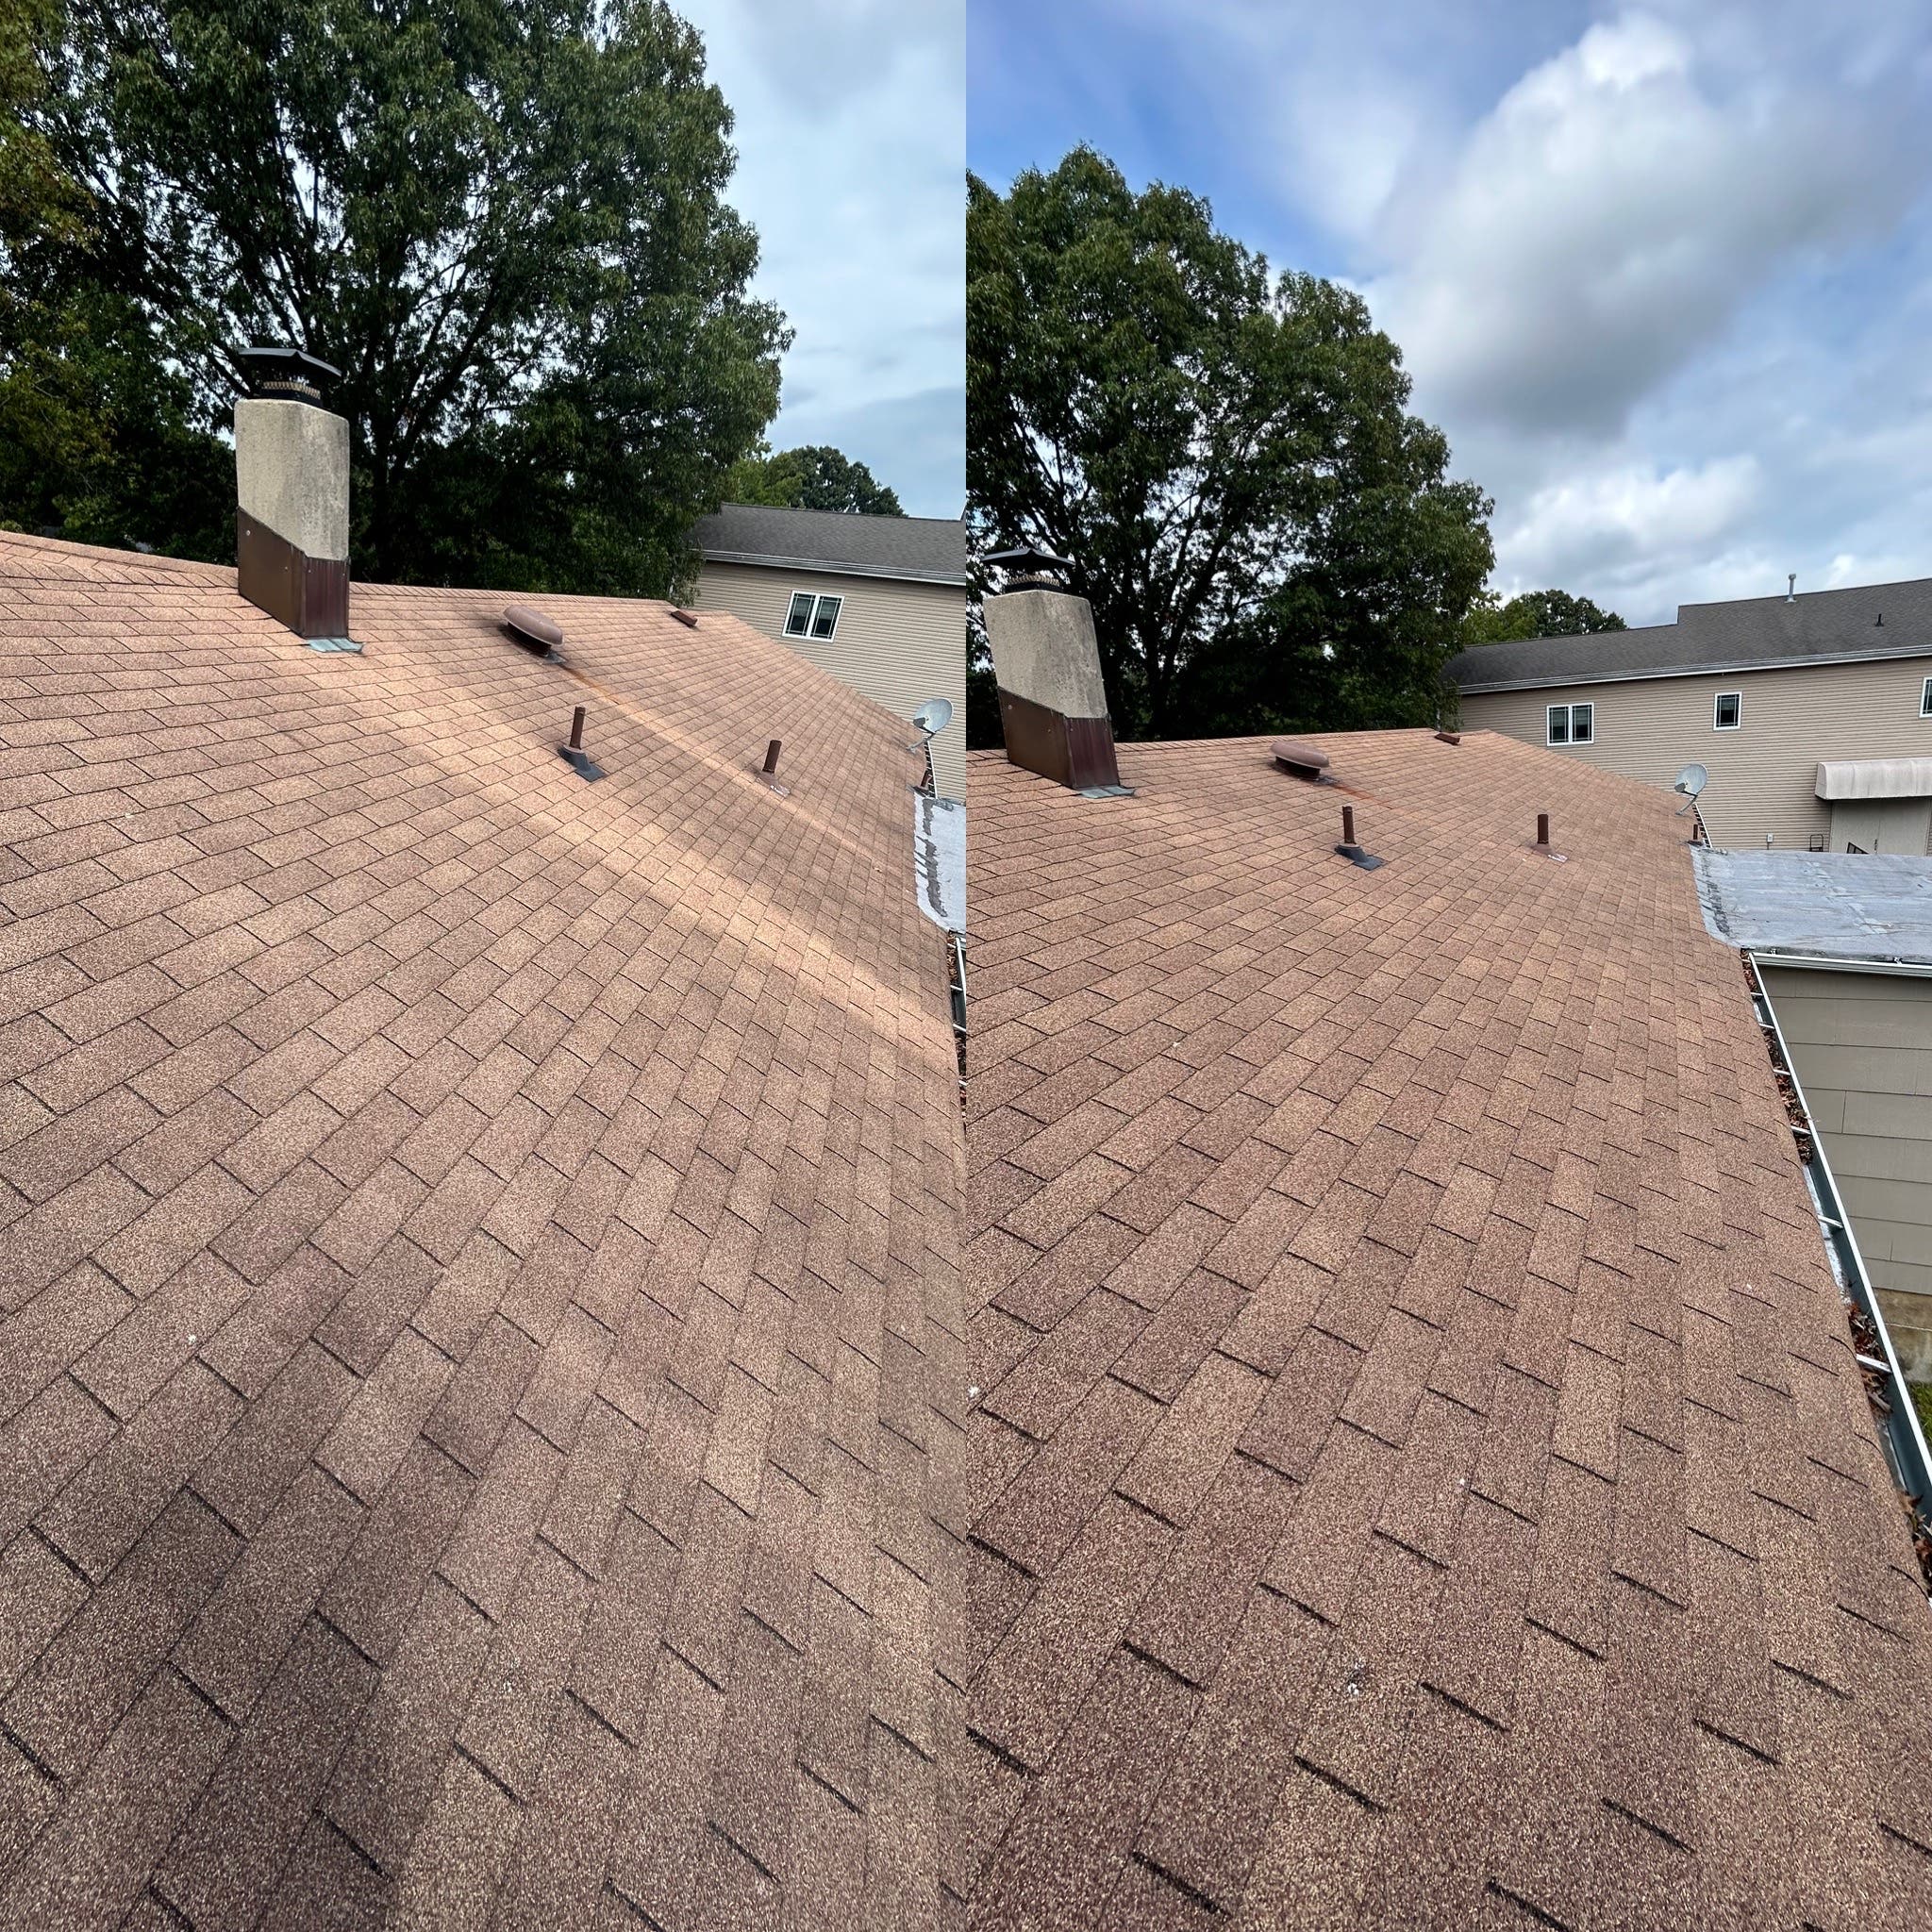 What’s Eating YOUR roof?